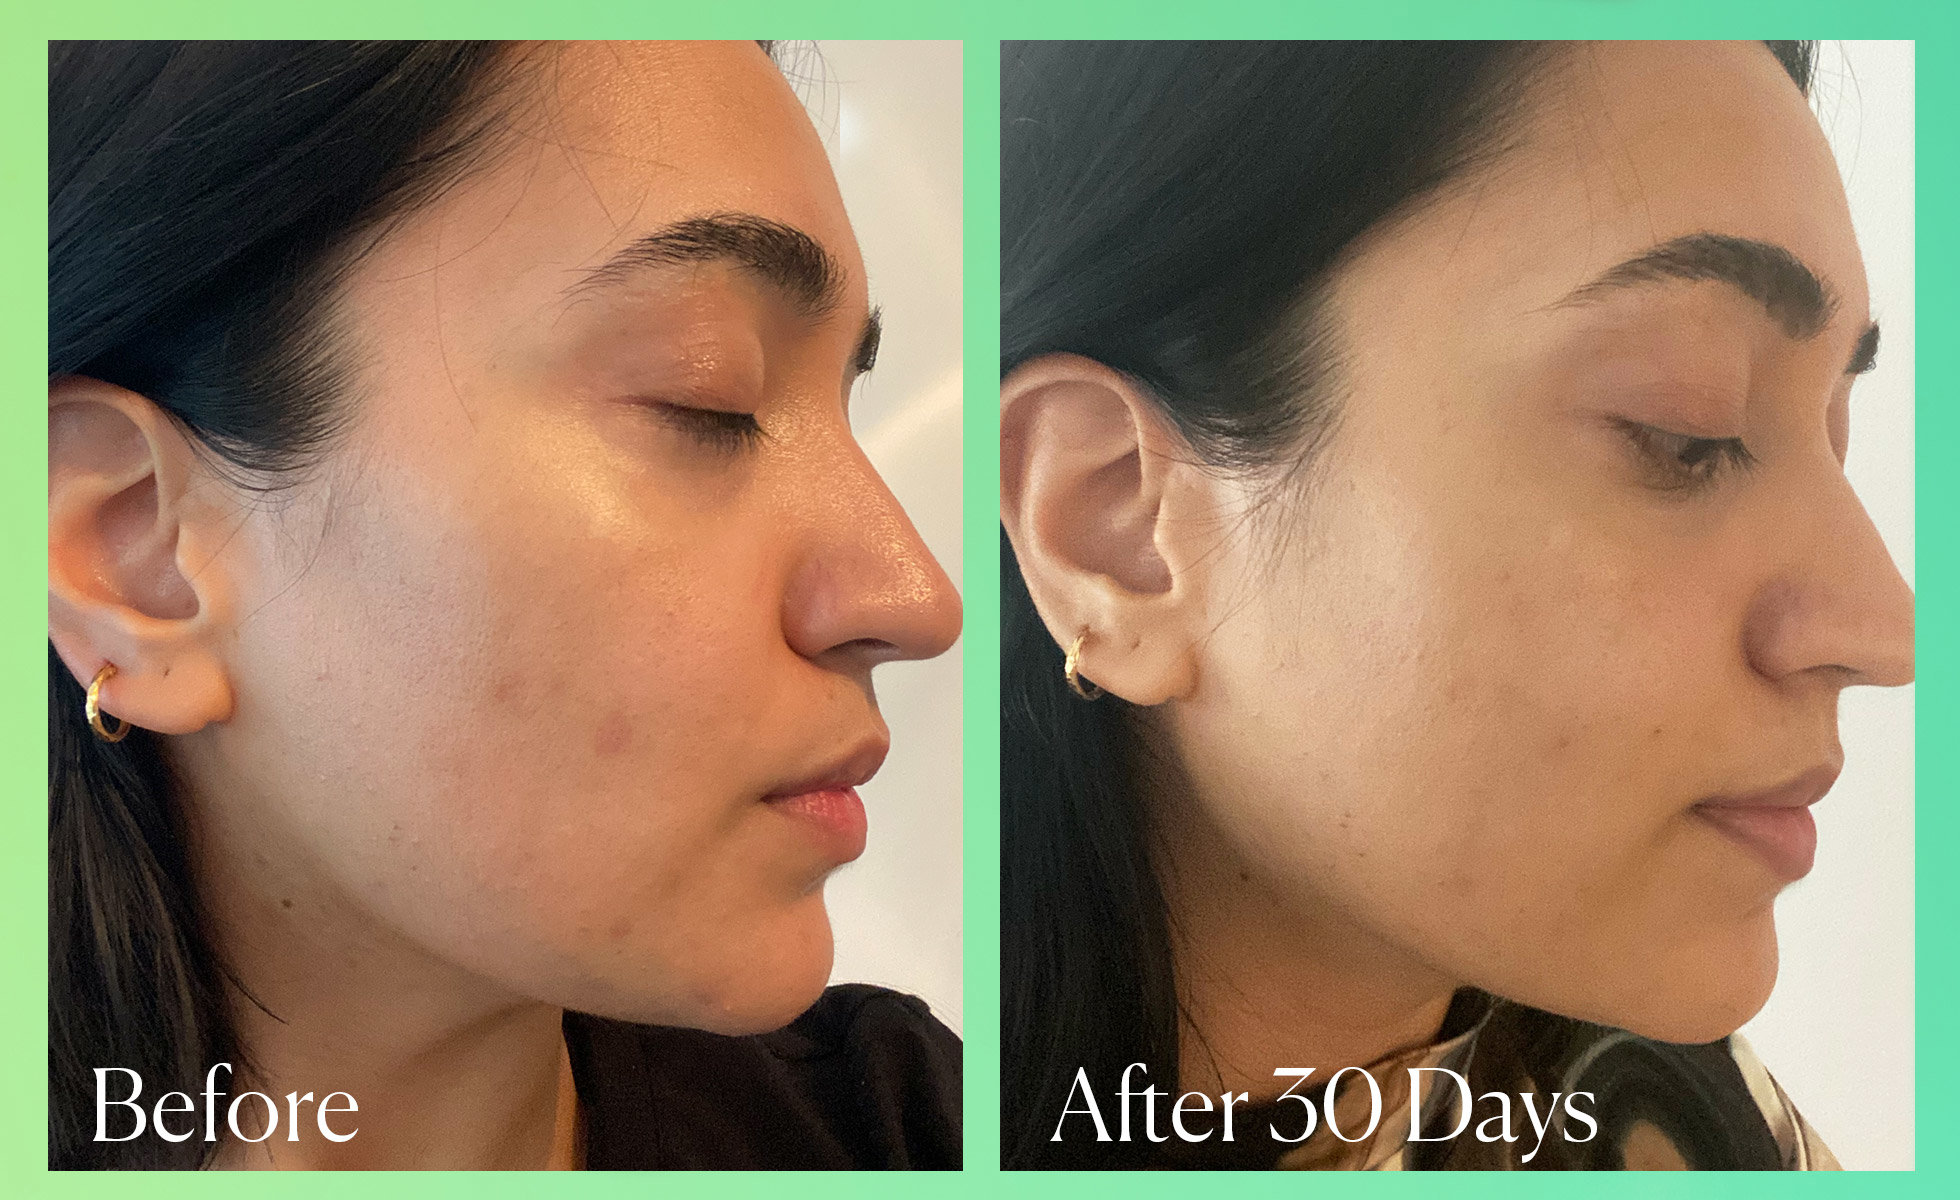 Nurain’s results after 30 days of using Good Molecules Discoloration Correcting Serum.